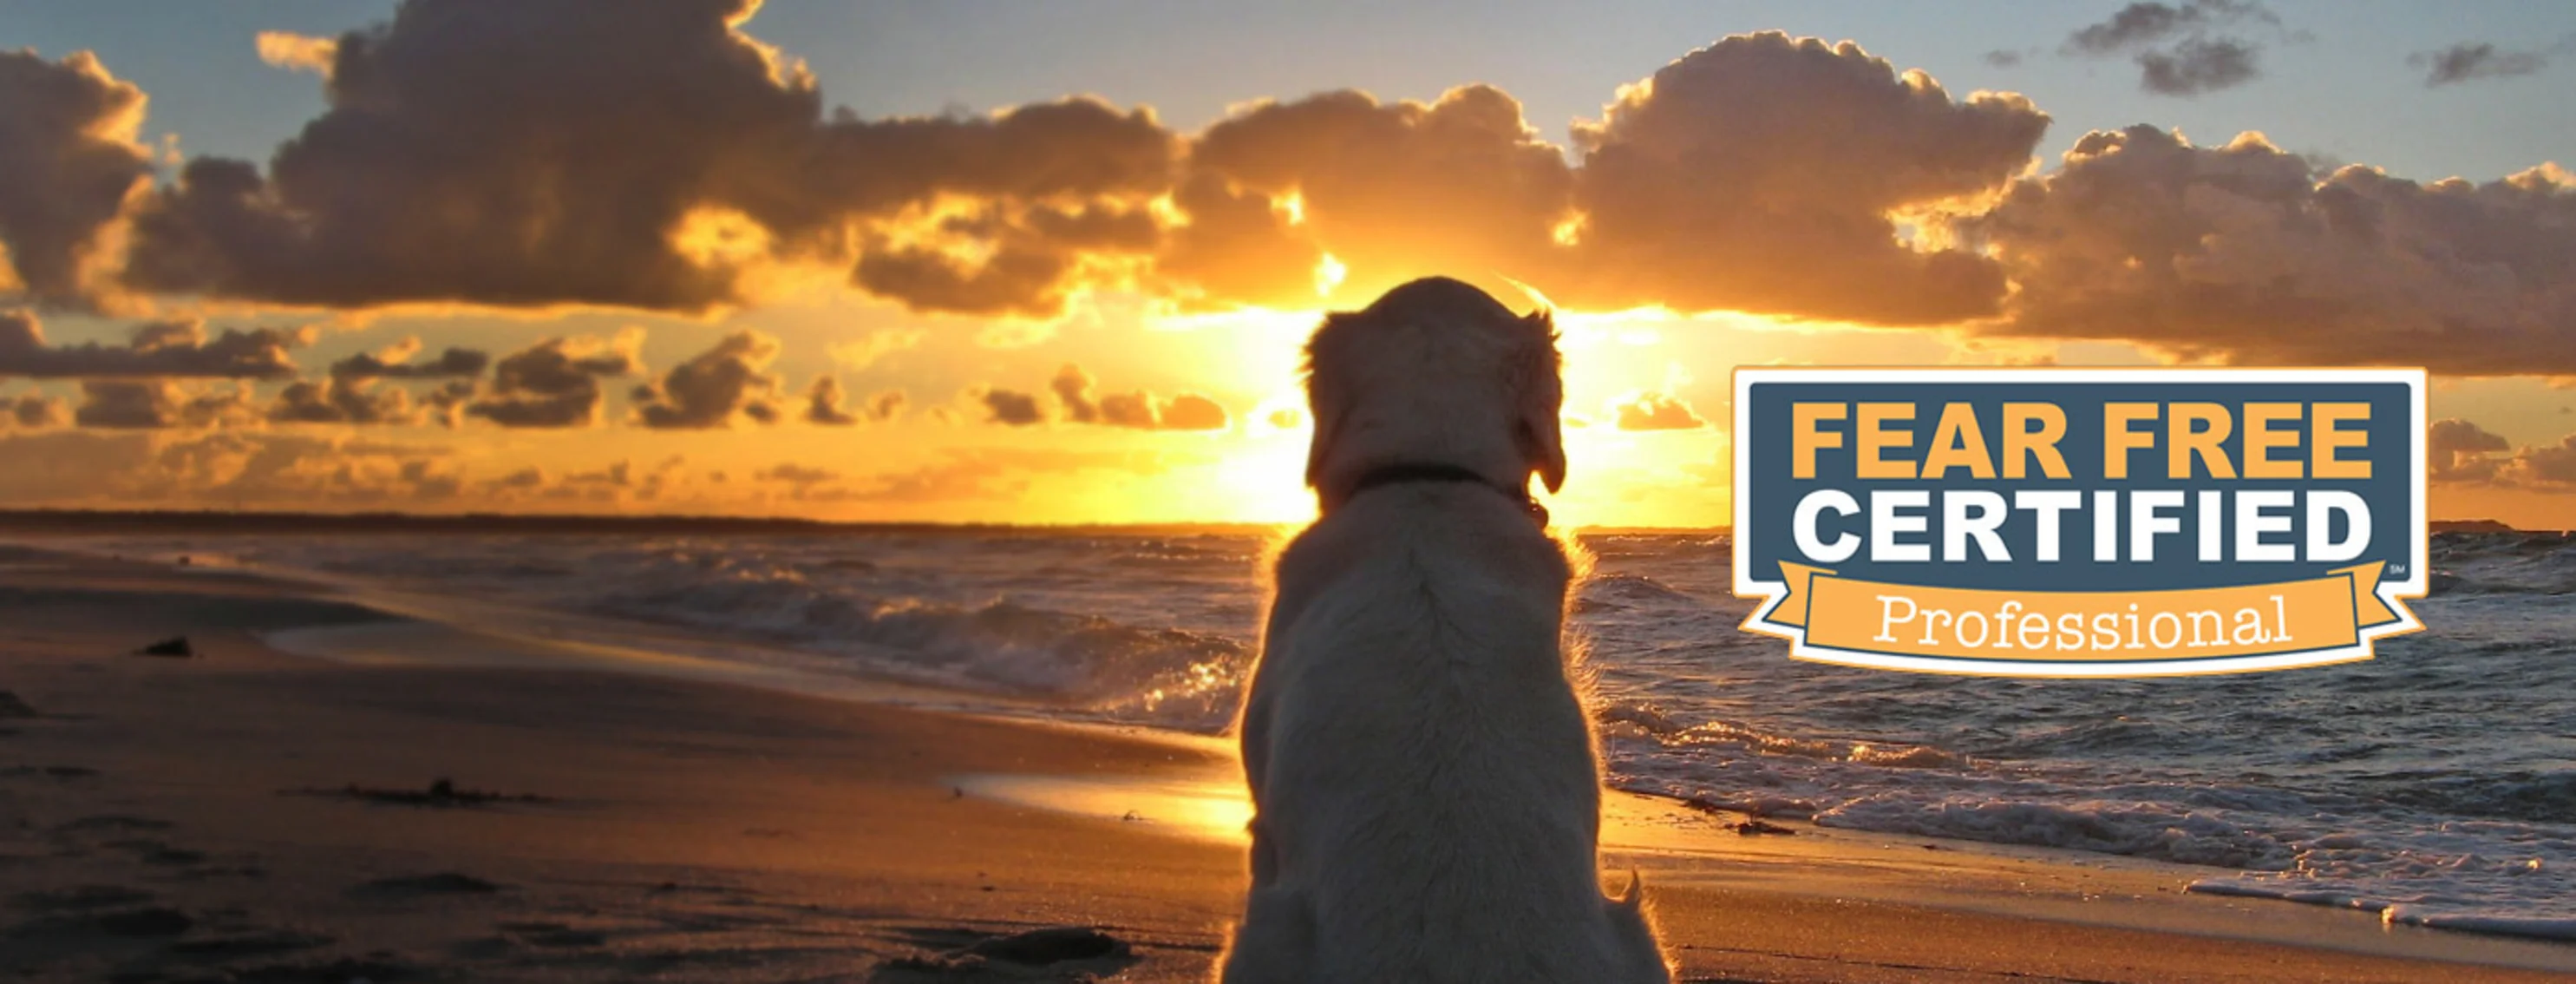 Labrador retriever sitting on a beach at sunset with the fear free logo